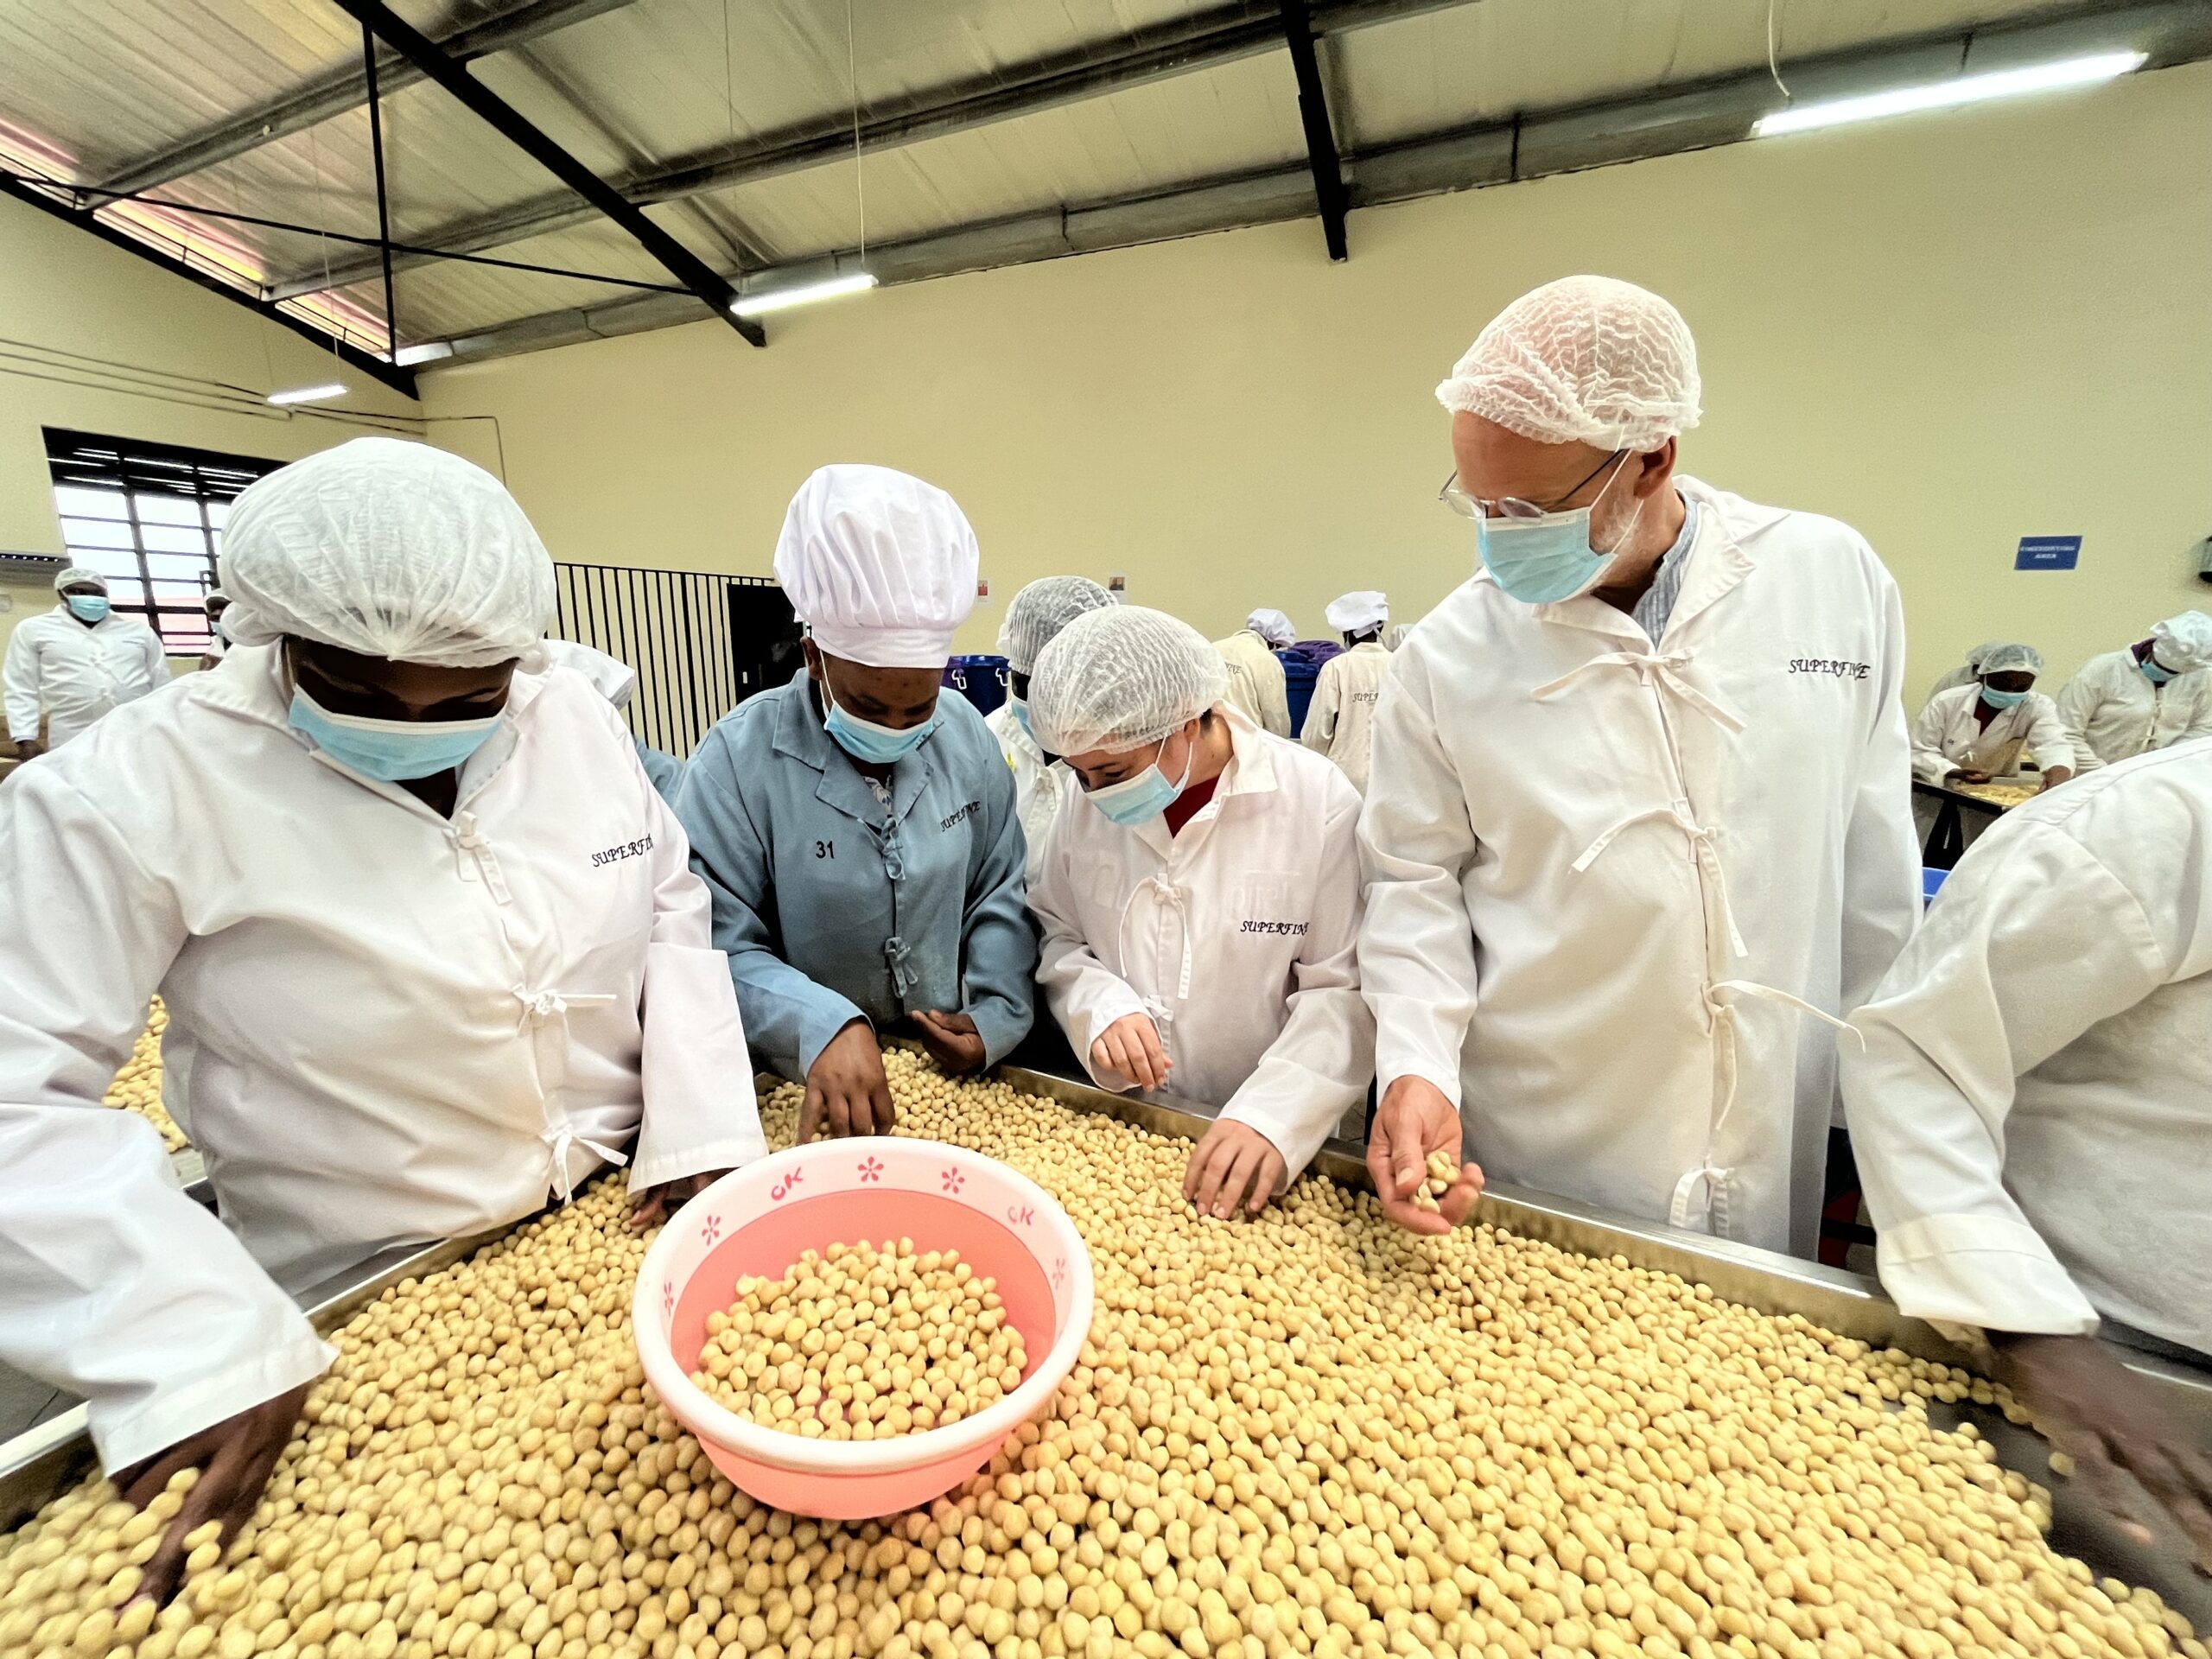 Superfine Africa Nuts employees sort macadamia nuts by hand alongside Root Capital’s Leonor Gutiérrez, Director of the Women in Agriculture Initiative, and CEO and Founder, Willy Foote. Photo credit: Root Capital